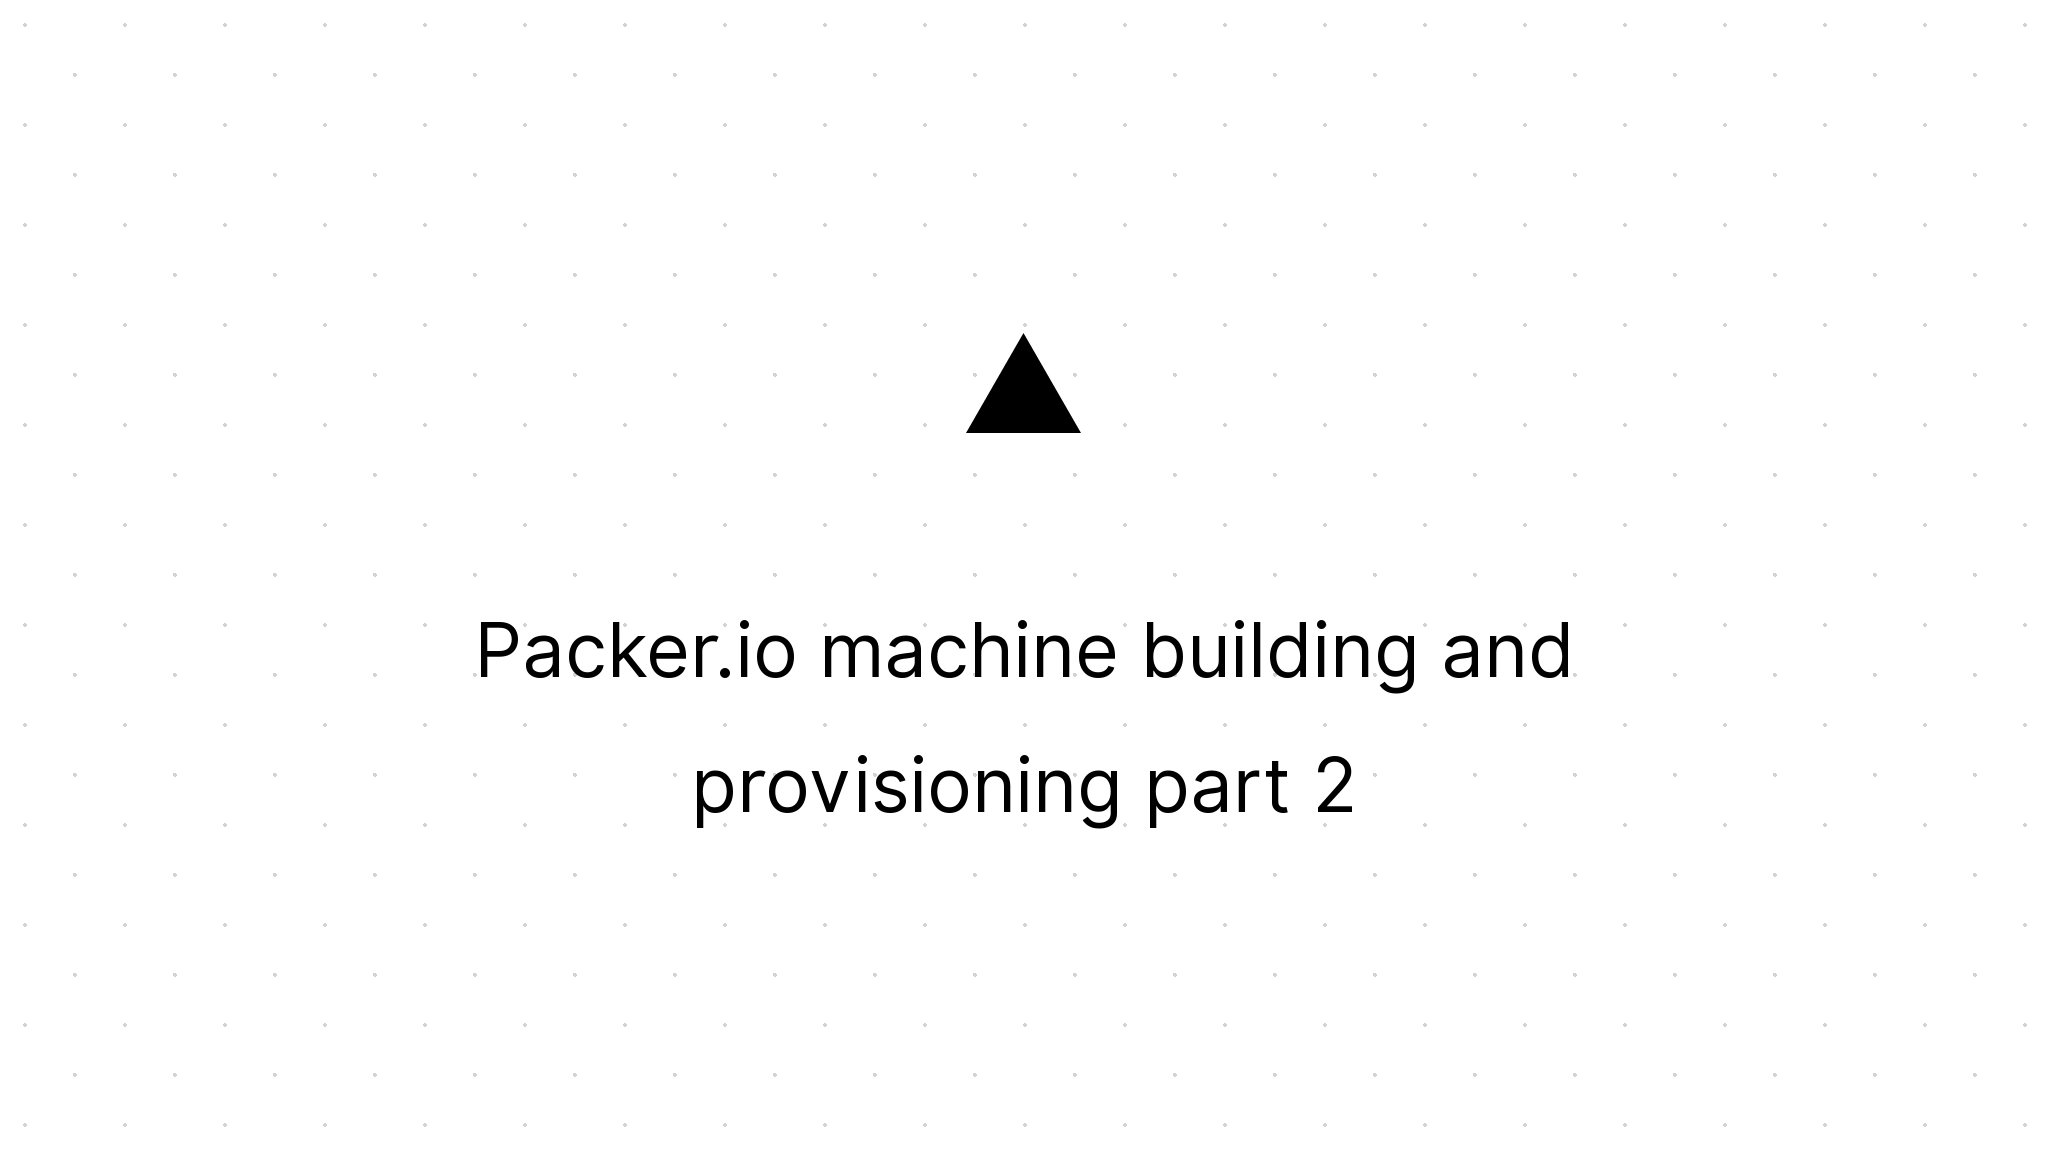 Cover Image for Packer.io machine building and provisioning part 2